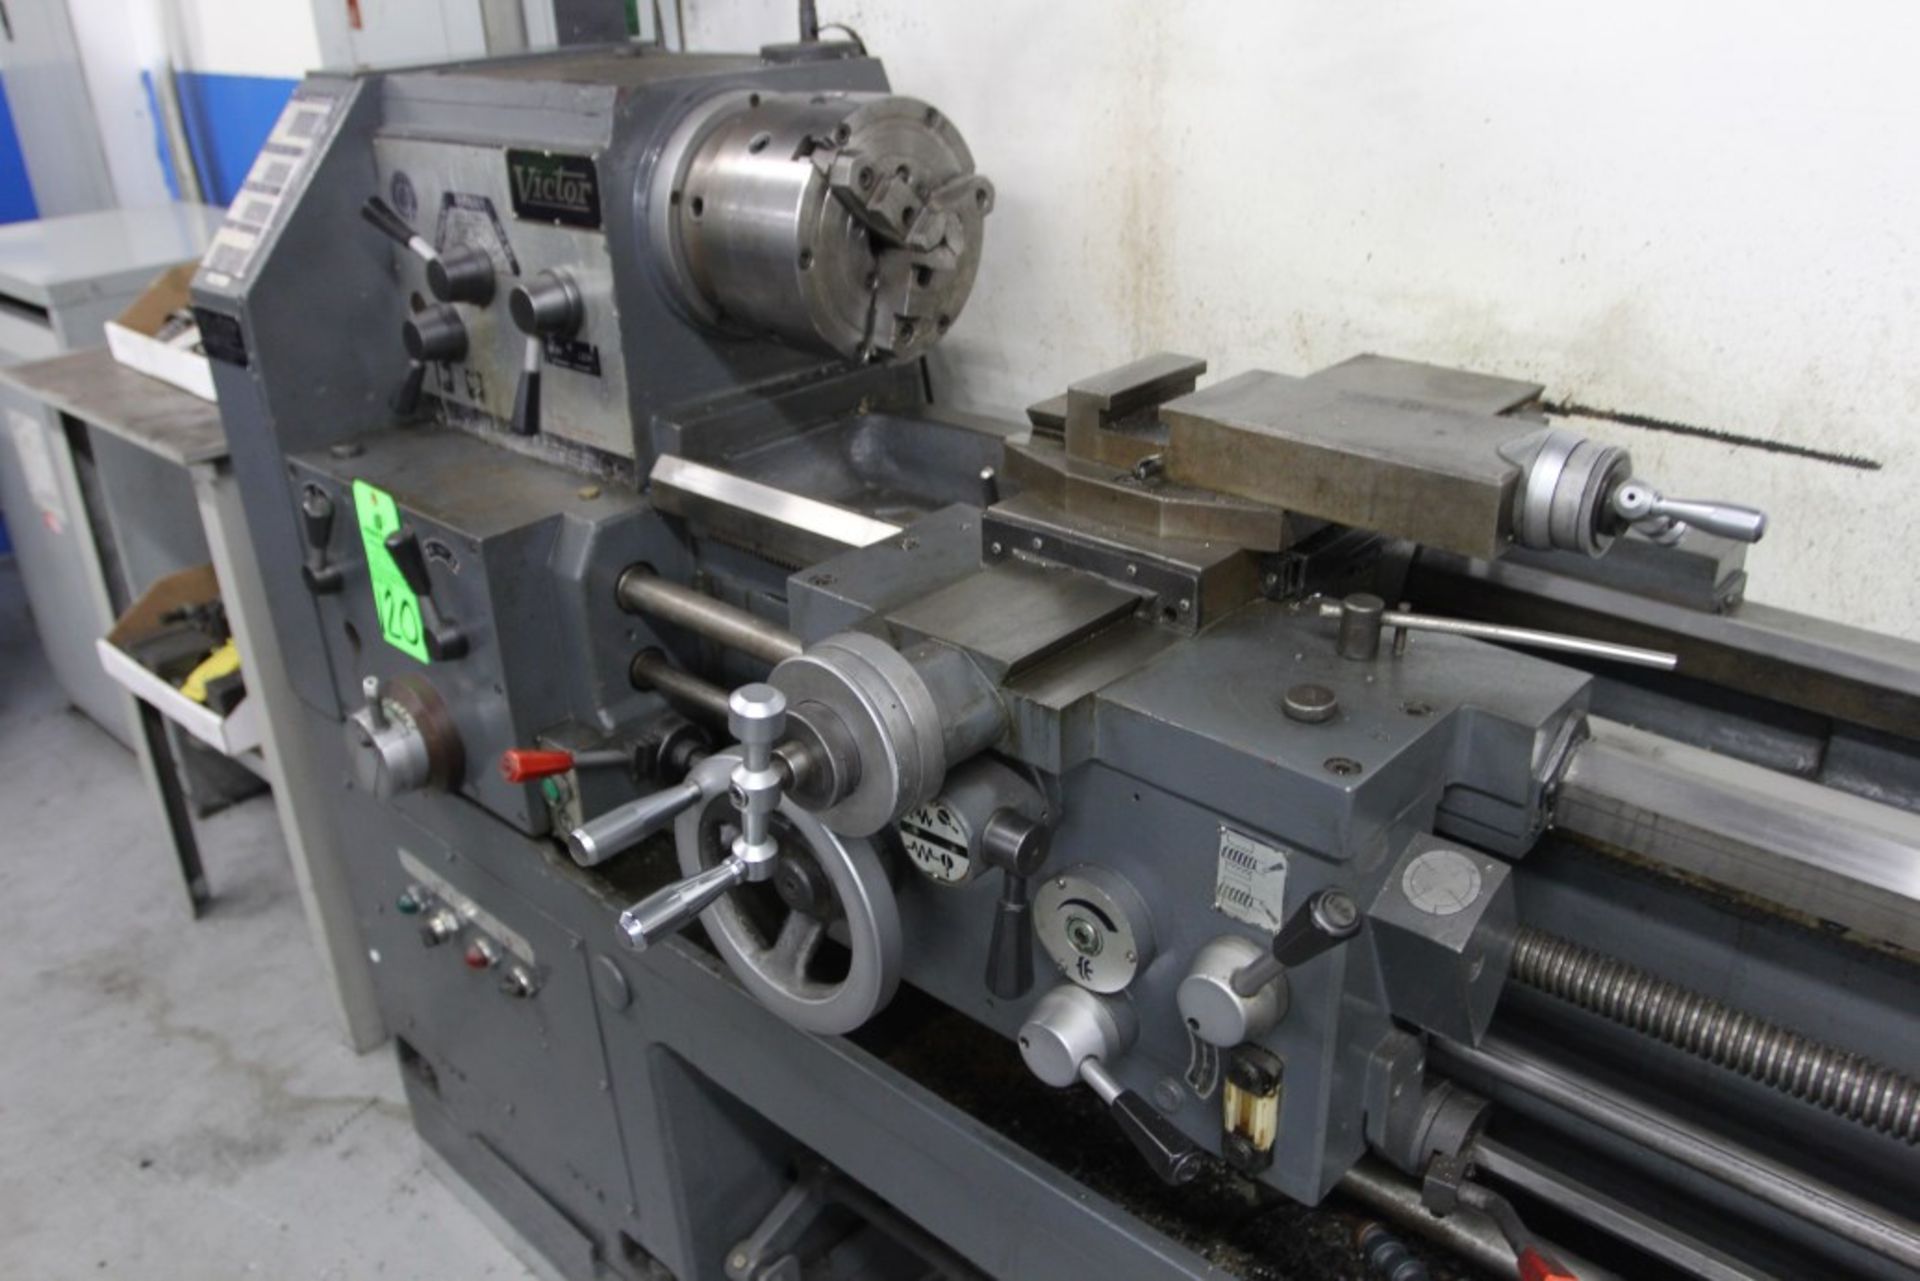 Victor 1640 Lathe; 16" Swing; 40" Between Centers; 8" 3-Jaw Chuck; Tool Post; 1800 RPM; Sargon DRO - Image 4 of 5